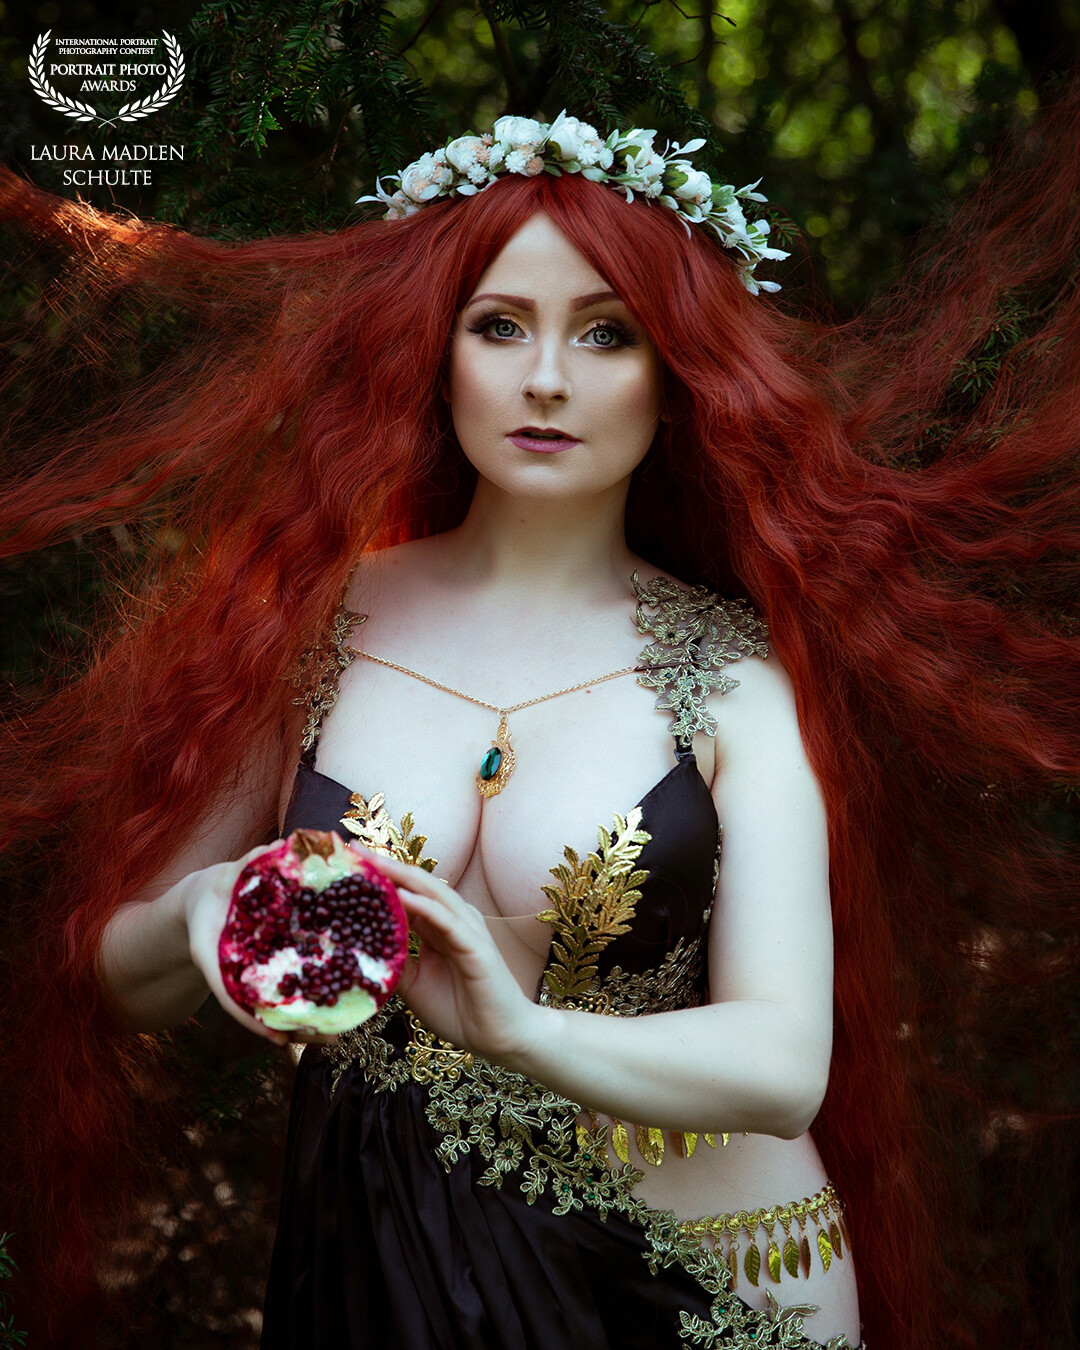 "I warned you, daughter. This scoundrel Hades is no good. You could've married the god of doctors or the god of lawyers, but no. You had to eat the pomegranate."<br />
<br />
My personal picture of Persephone.<br />
Photoshooting took place outdoor, with available light. Canon 5D Mark IV<br />
Model: Maya Lou<br />
Dress Designer Avalon Saez